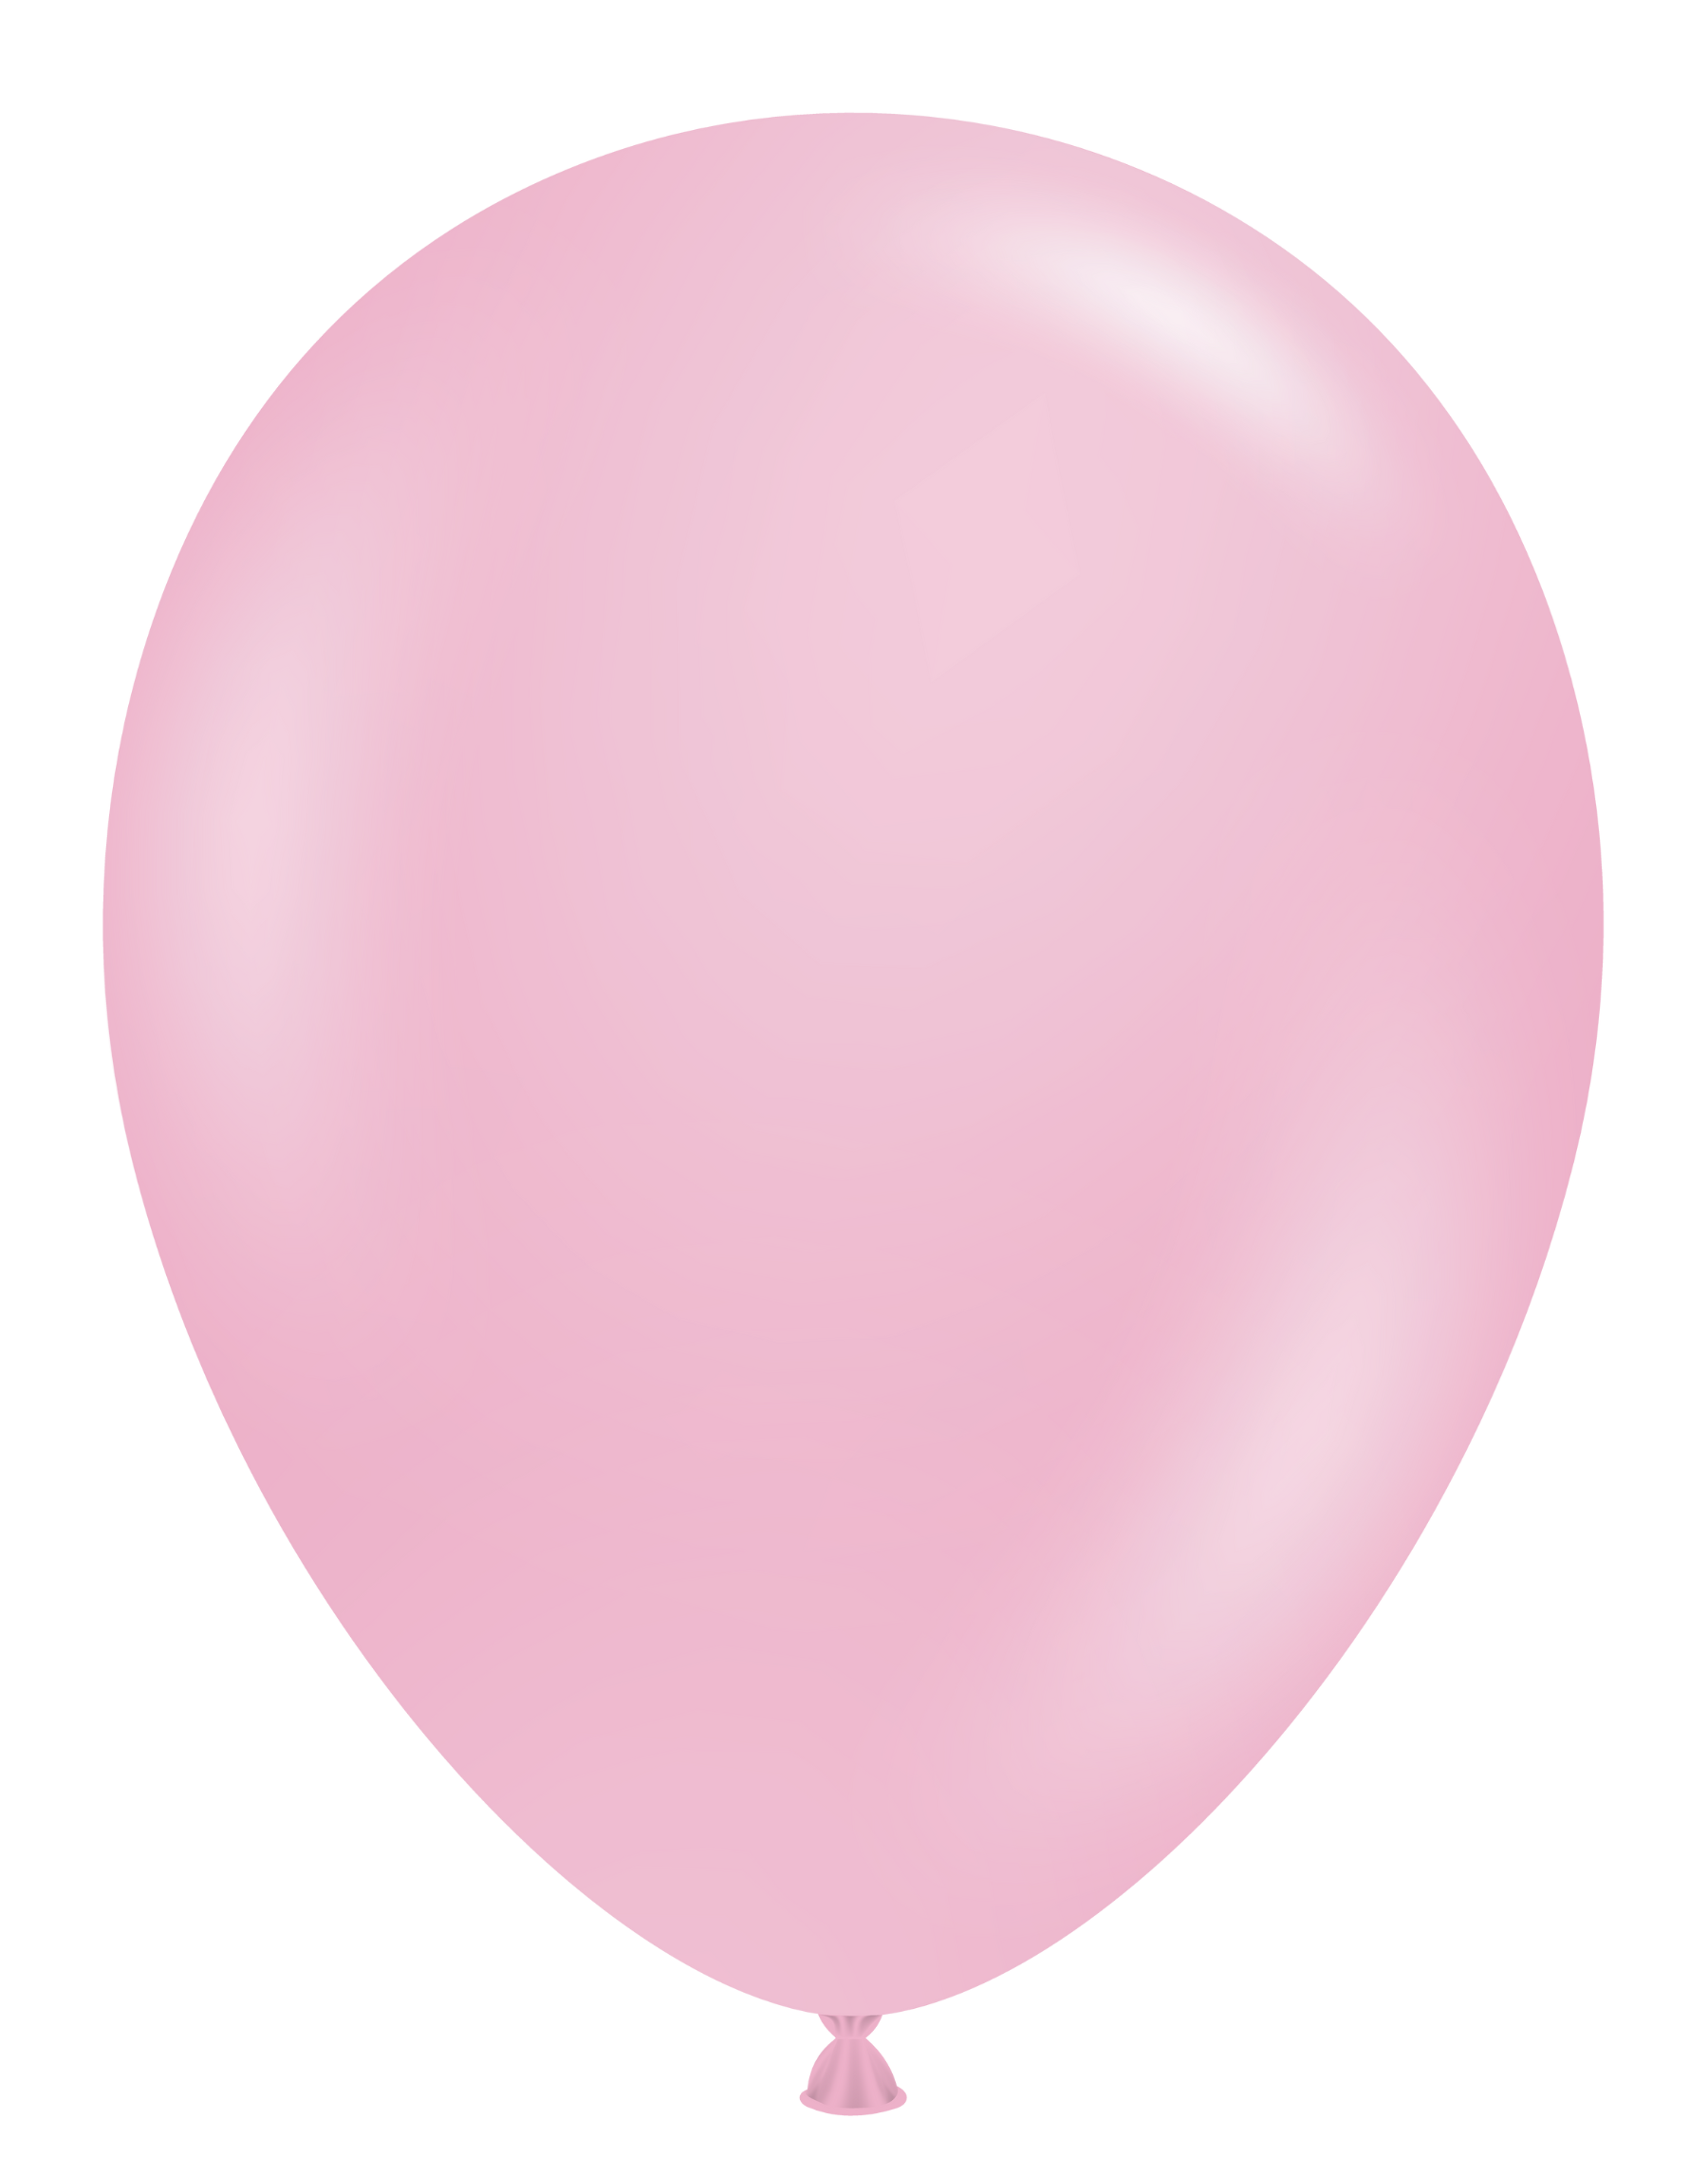 11" TUFTEX Pink Latex Balloons | 100 Count